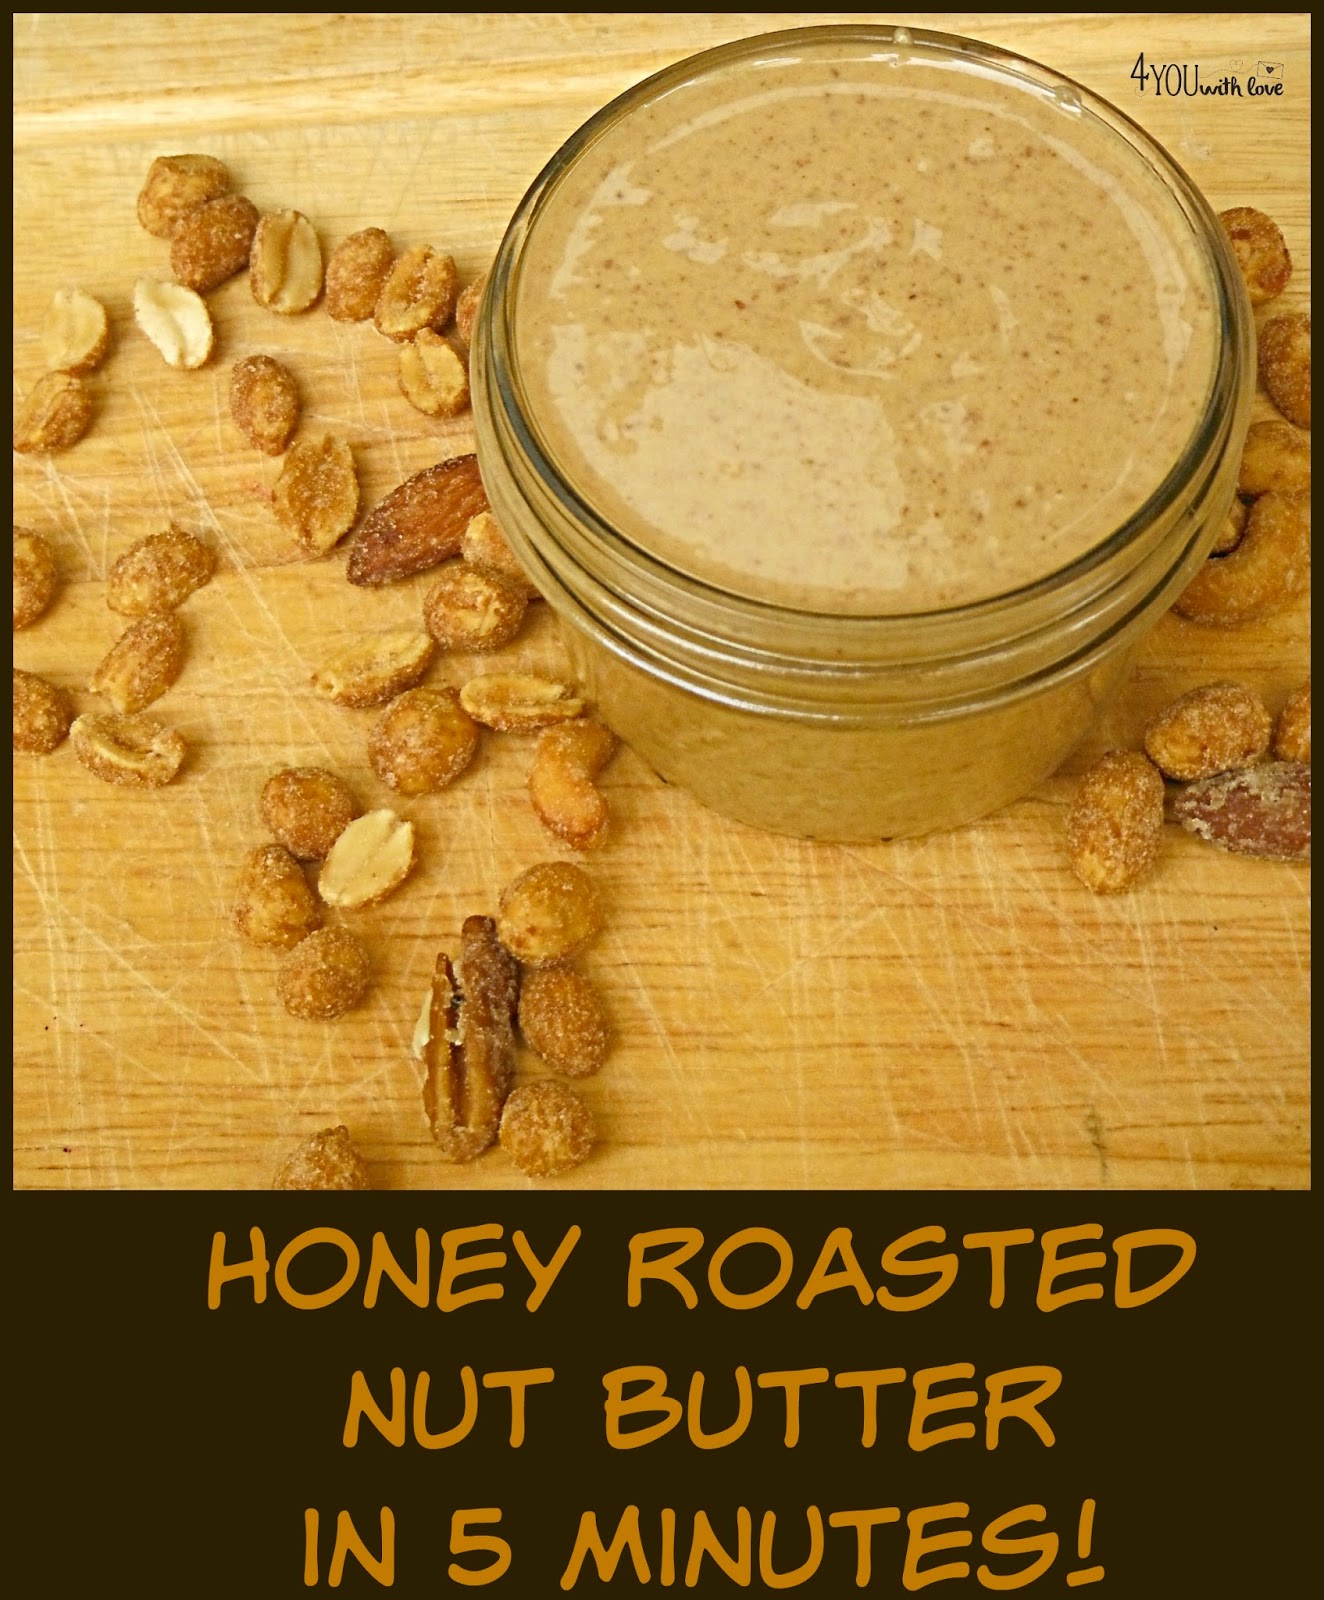 Honey Roasted Nut Butter in Just 5 Minutes!